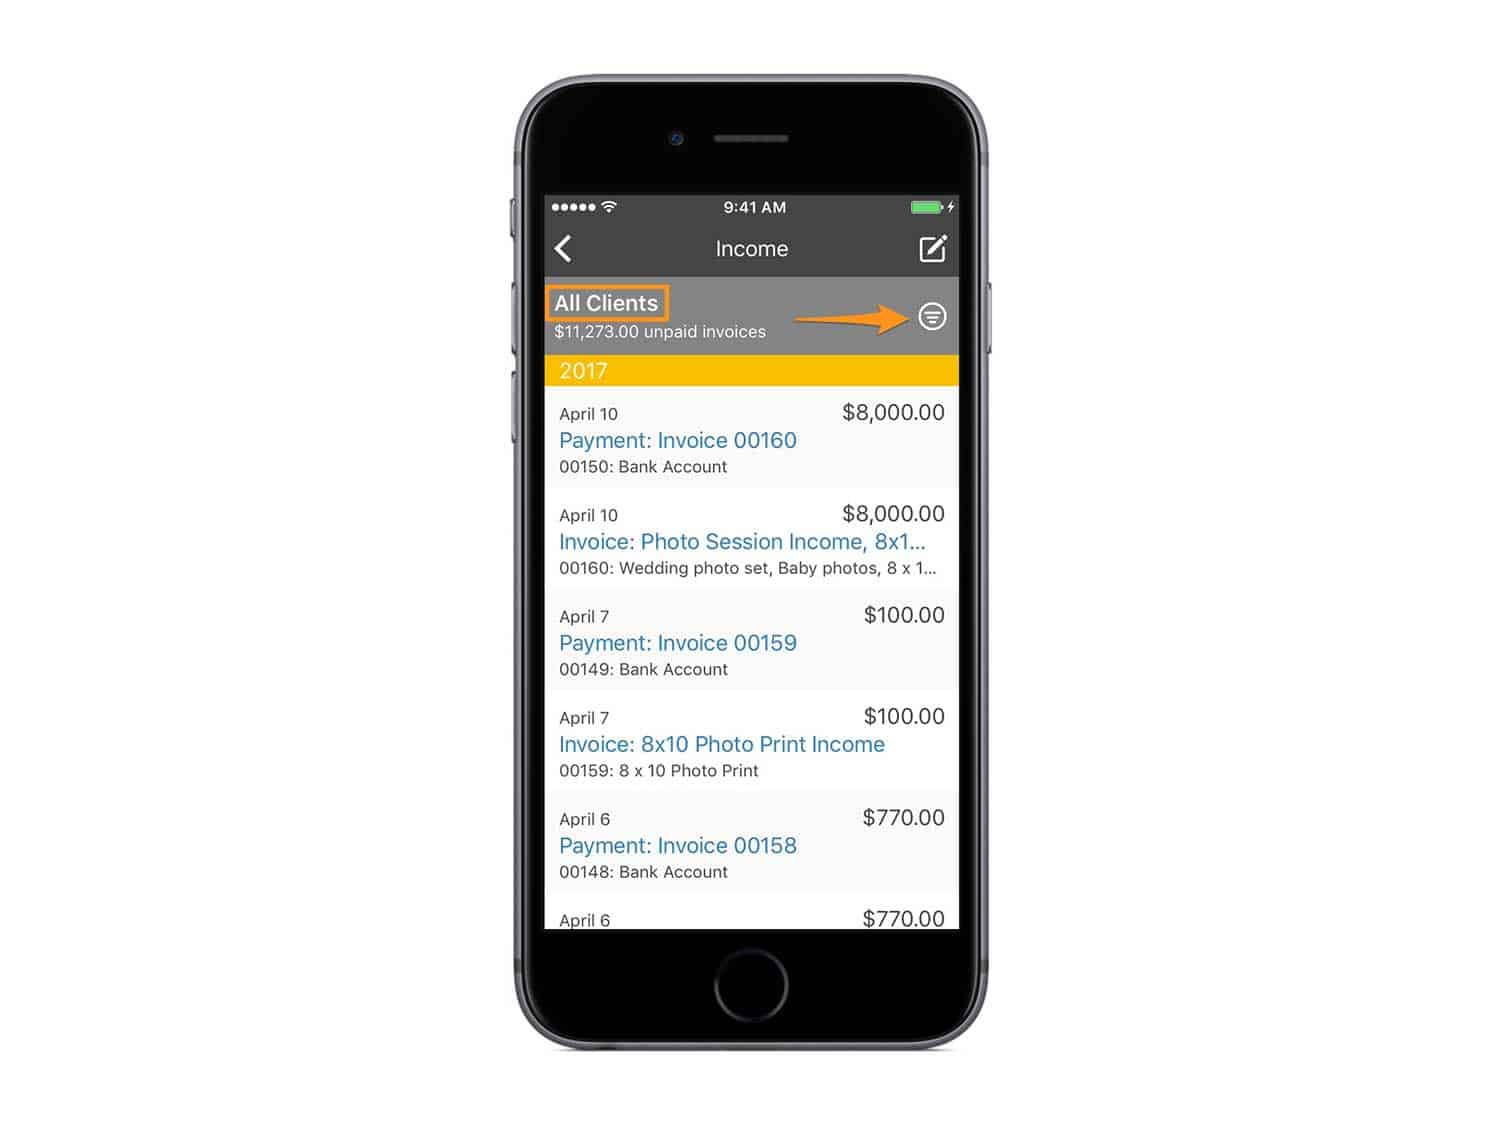 Filter your lists by client or supplier.